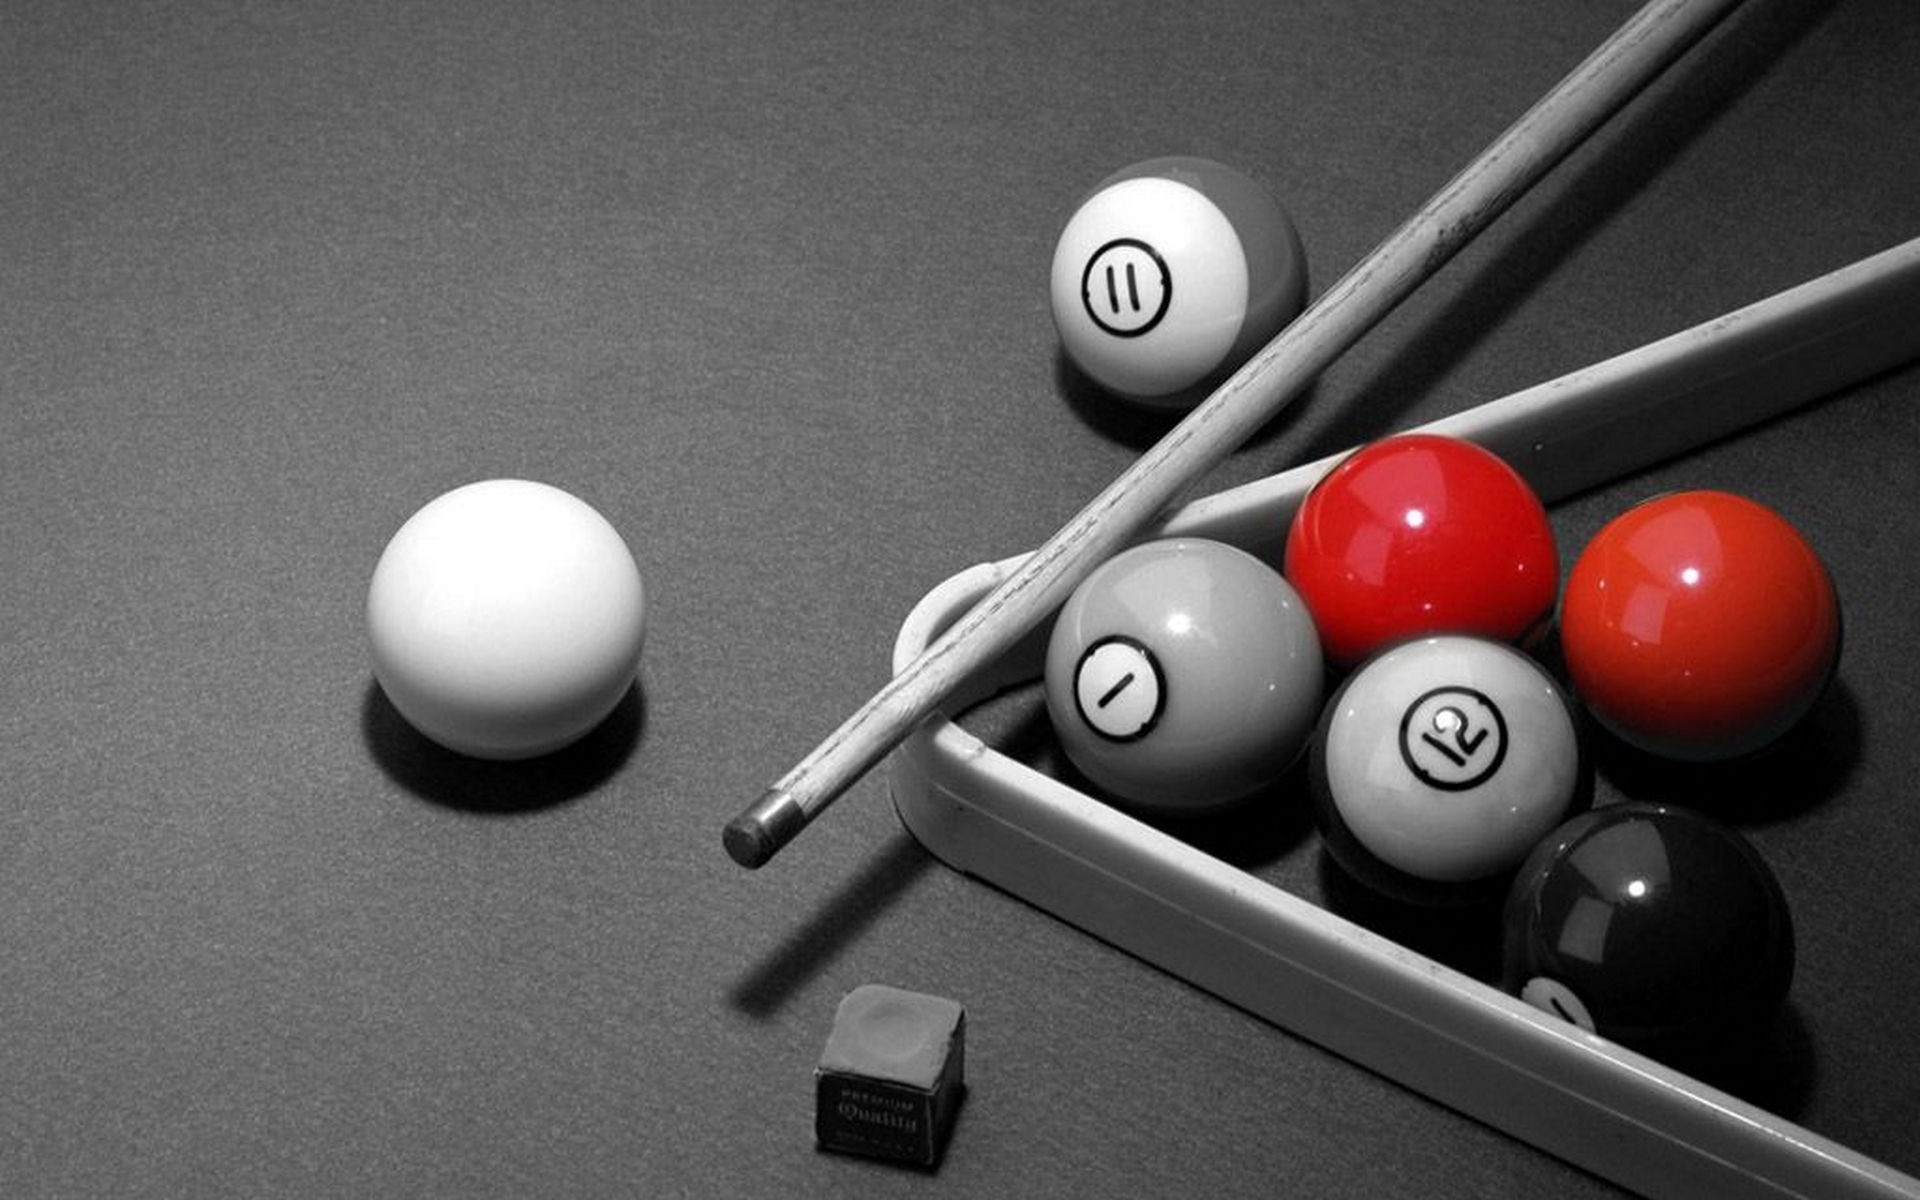 abstract snooker cue pool game recreation ball gambling competition leisure sport play still life challenge sphere red black balls table